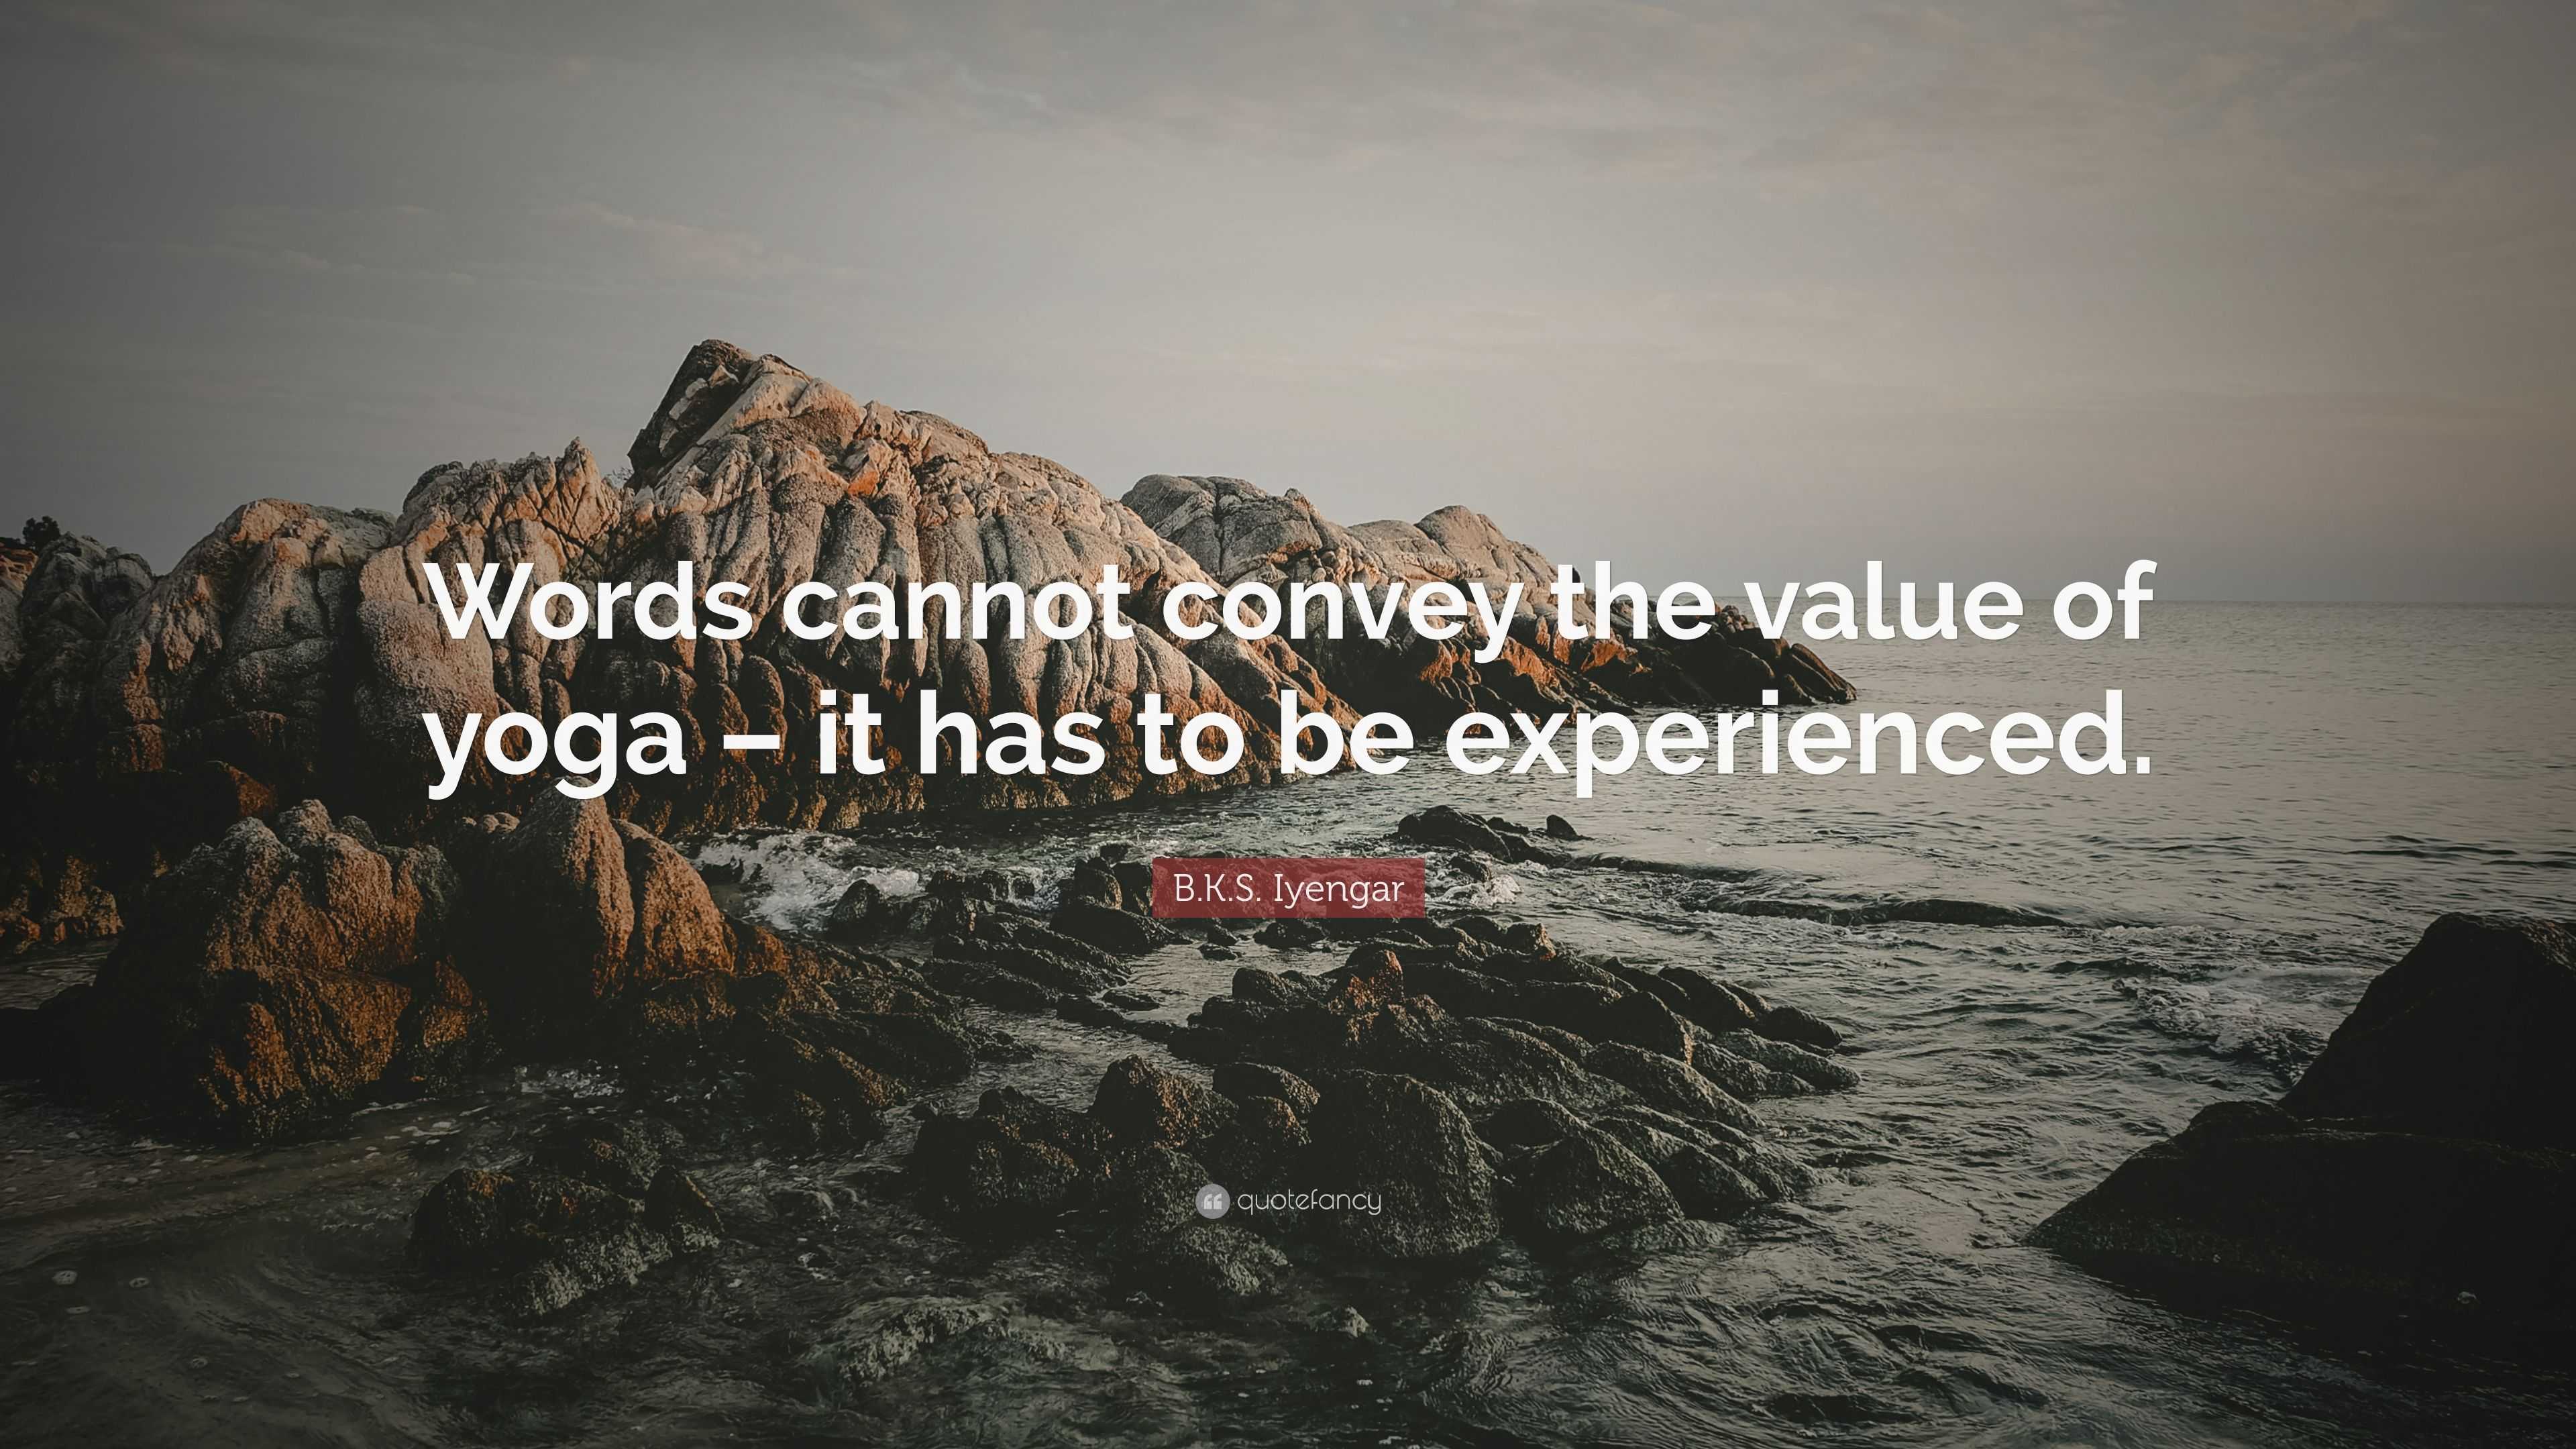 B.K.S. Iyengar Quote: “Words cannot convey the value of yoga – it has to be  experienced.”